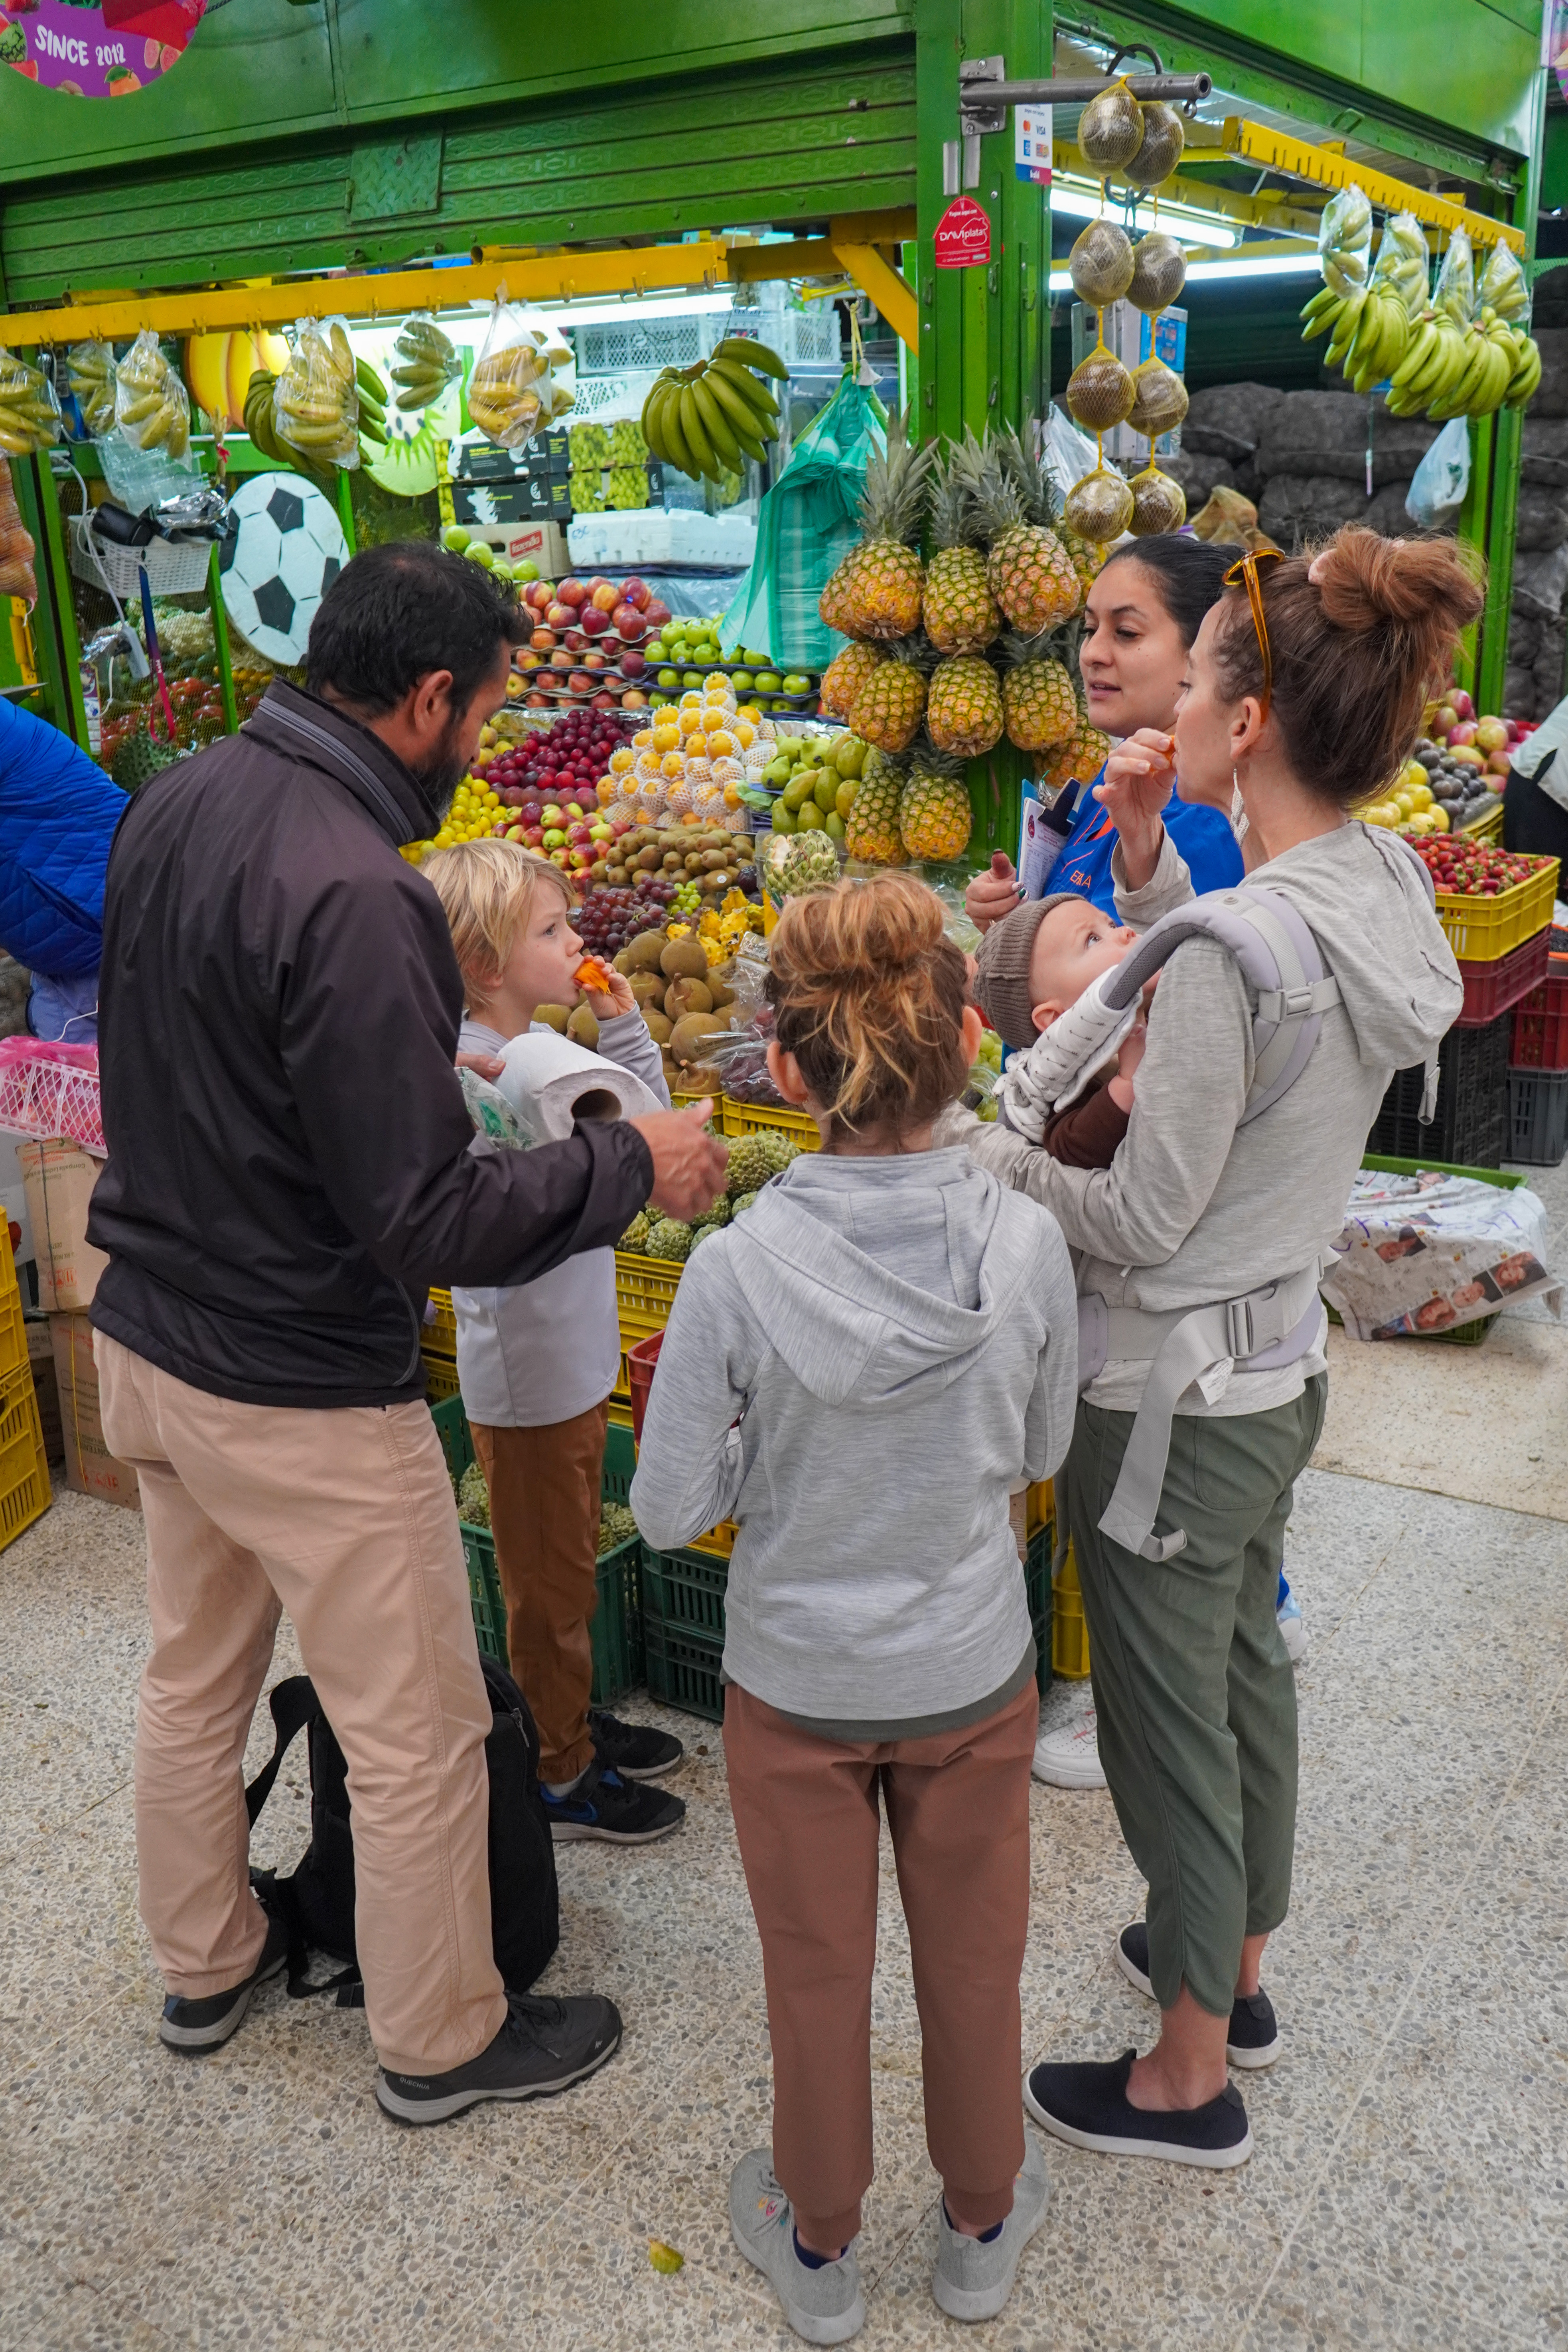 Tasting all the fruits of the country is a must during your 3 weeks in Colombia, which you can do at Paloquemao Market.